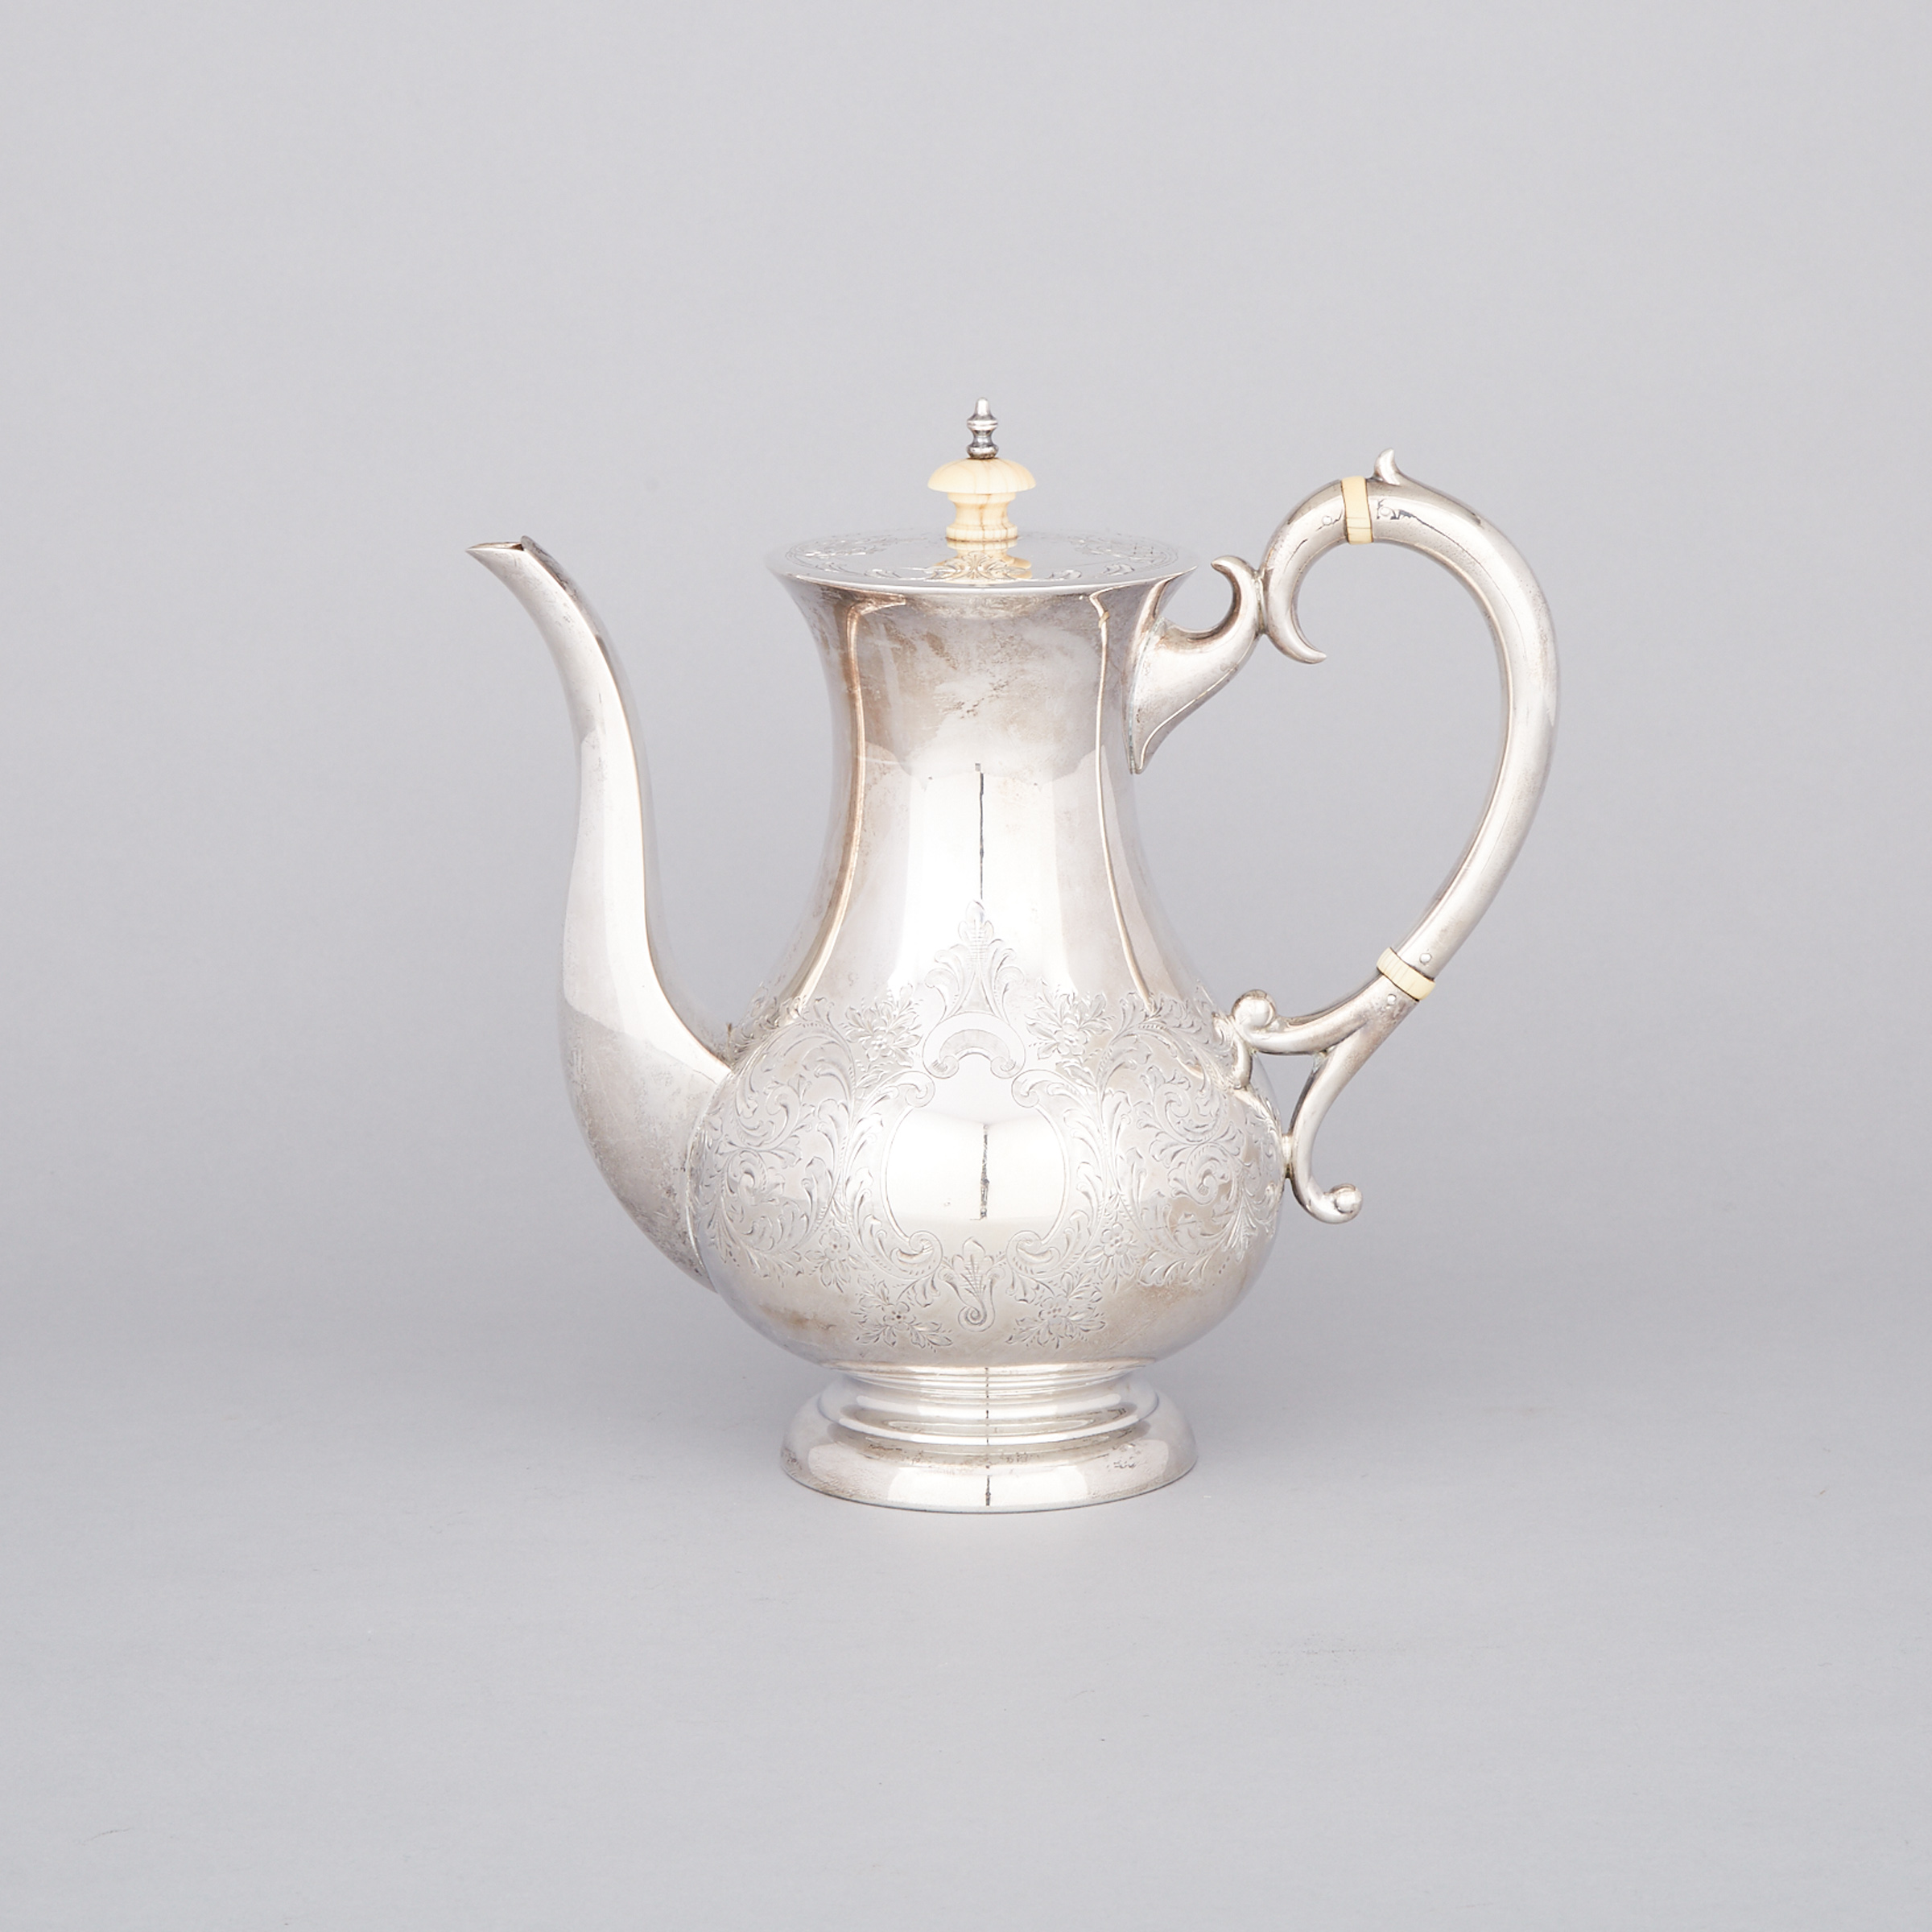 Canadian Silver Coffee Pot, Roden Bros., Toronto, Ont., 20th century